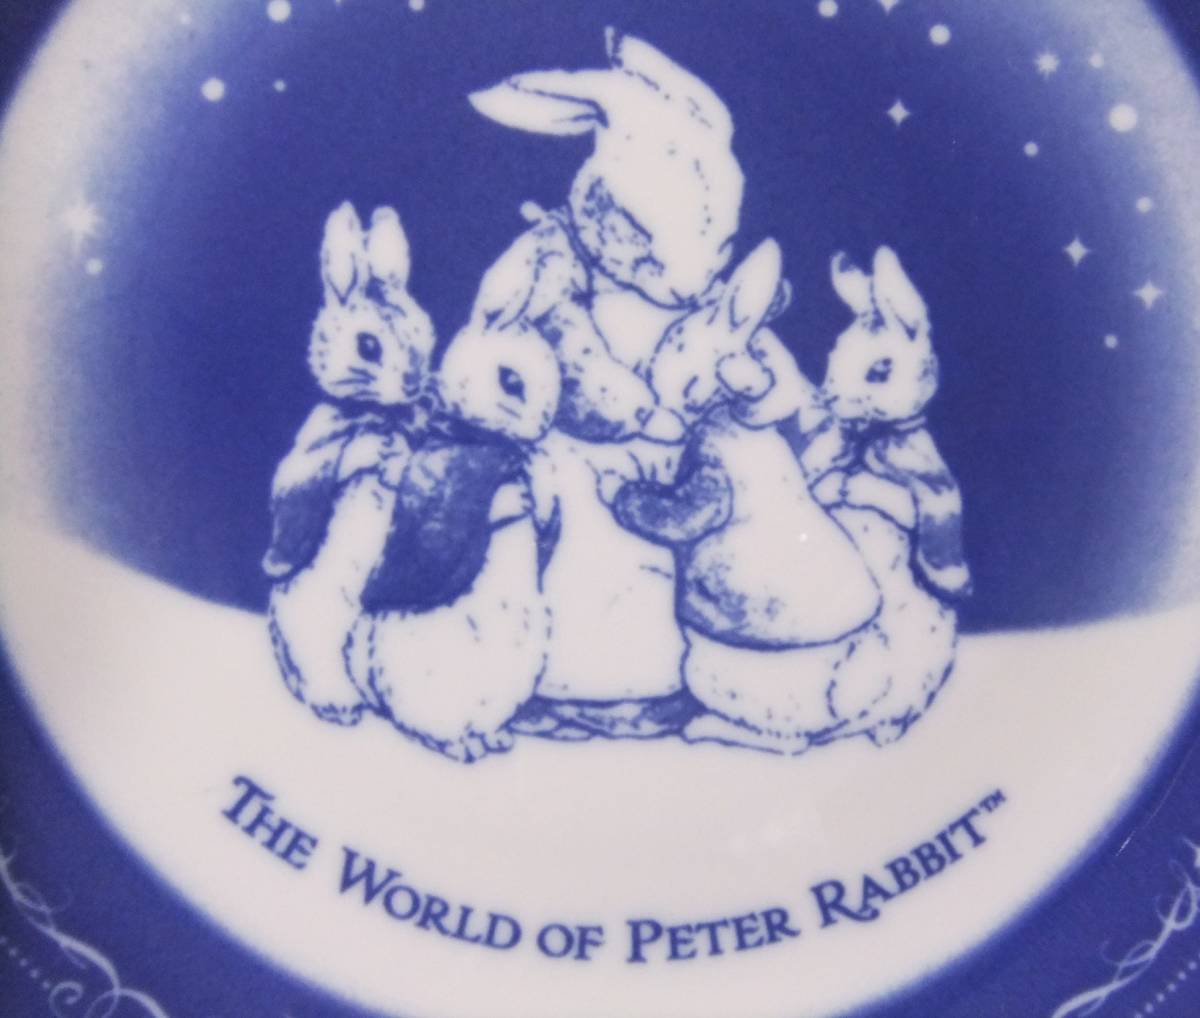 * new goods not for sale Peter Rabbit original year plate 2019 stand attaching PETER RABBIT MUFG Mitsubishi UFJ confidence . Bank made in Japan 